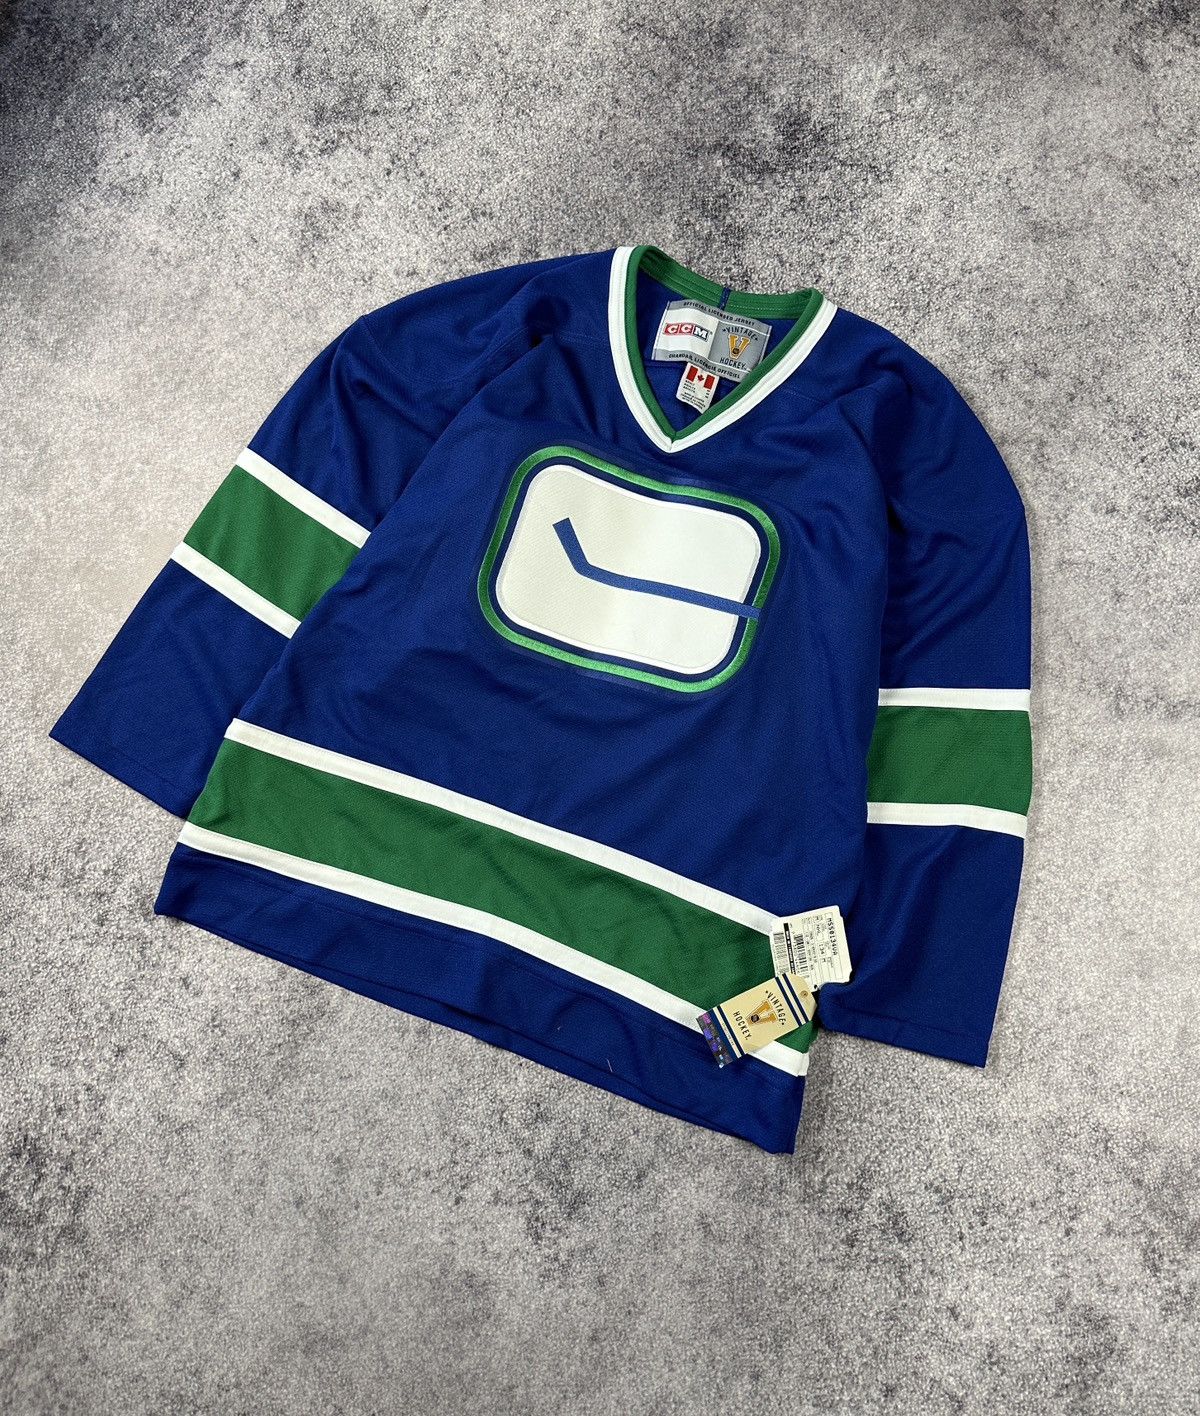 Pre-owned Hockey Jersey X Nhl Vintage Vancouver Canucks Ccm Hockey Jersey Nhl Usa M In Blue